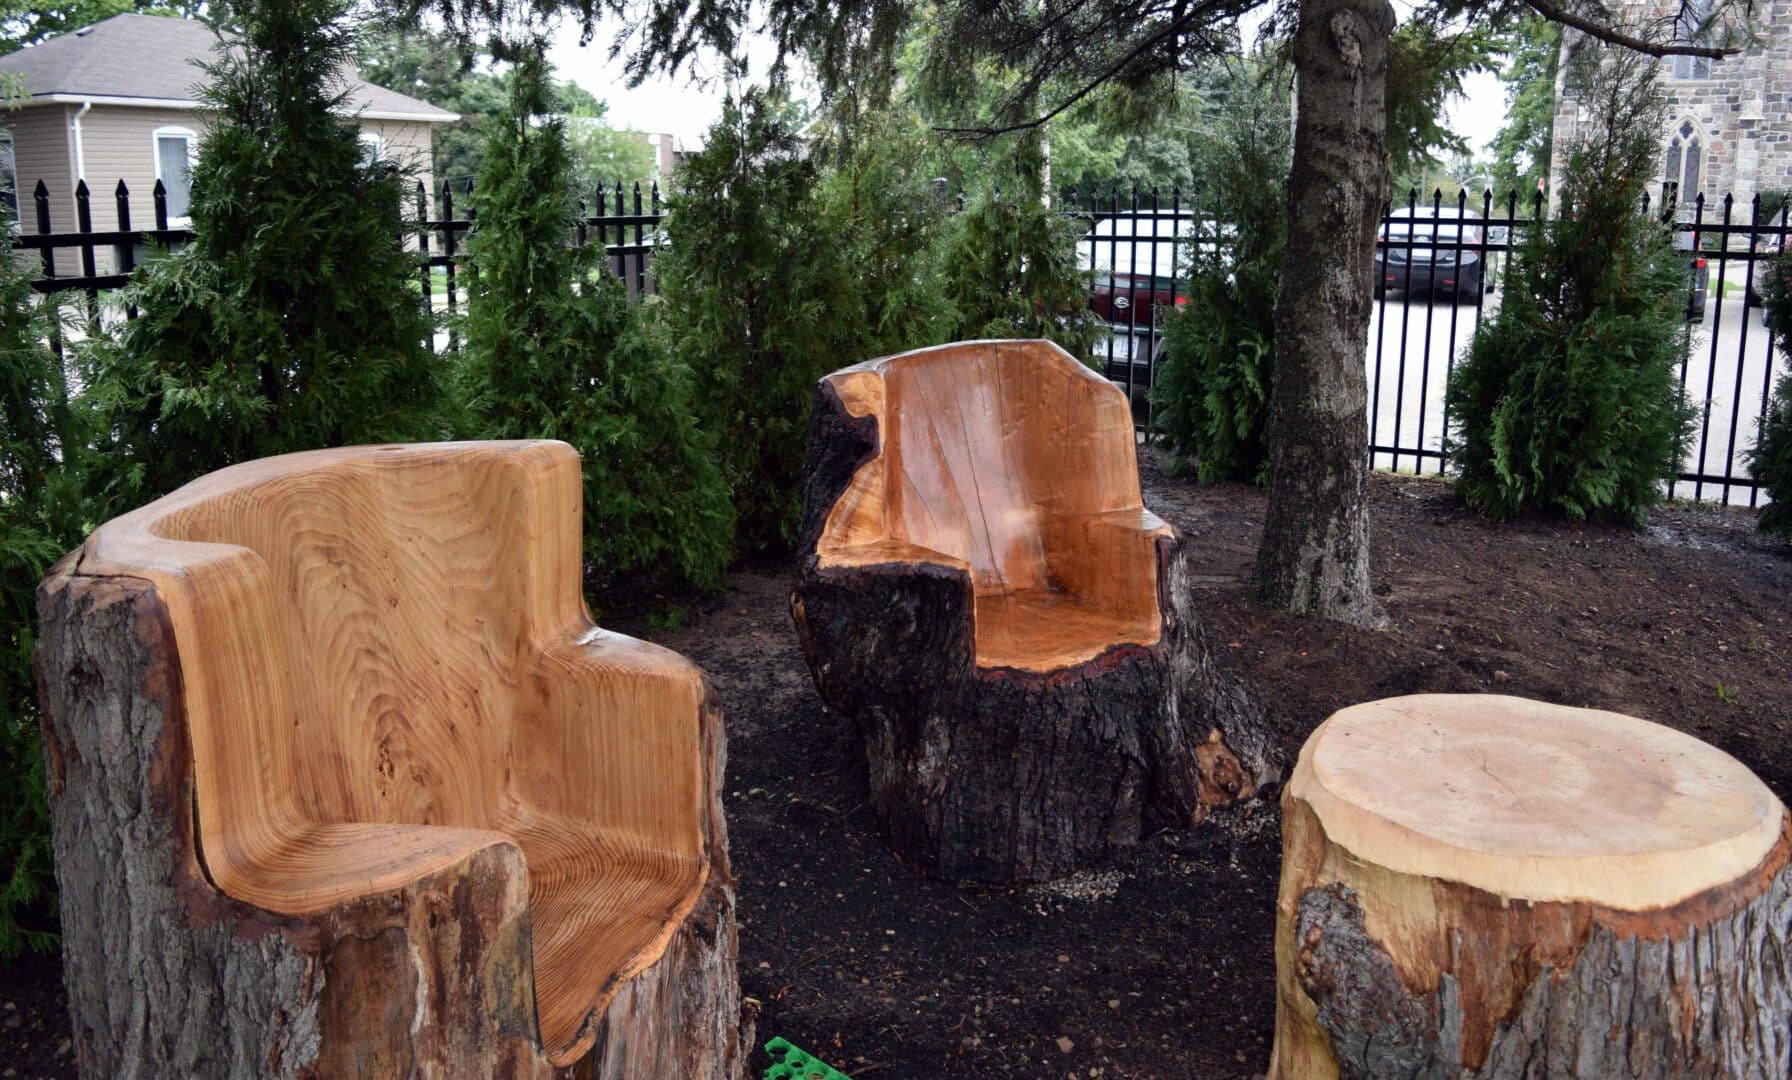 two chairs carved out of a tree trunk sit around a tree trunk table in a peaceful garden